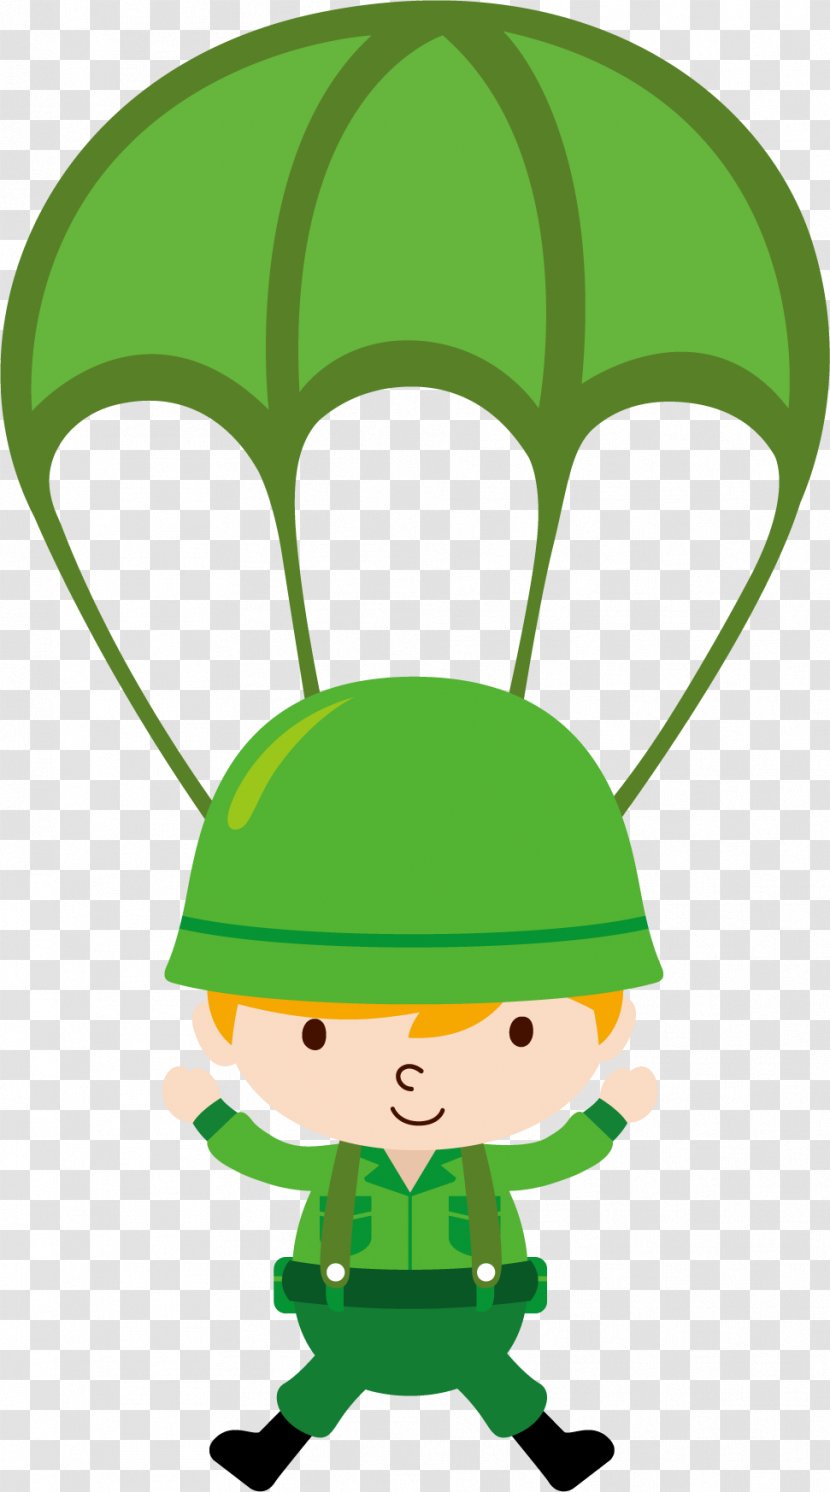 Soldier Army Military Clip Art - Leaf Transparent PNG